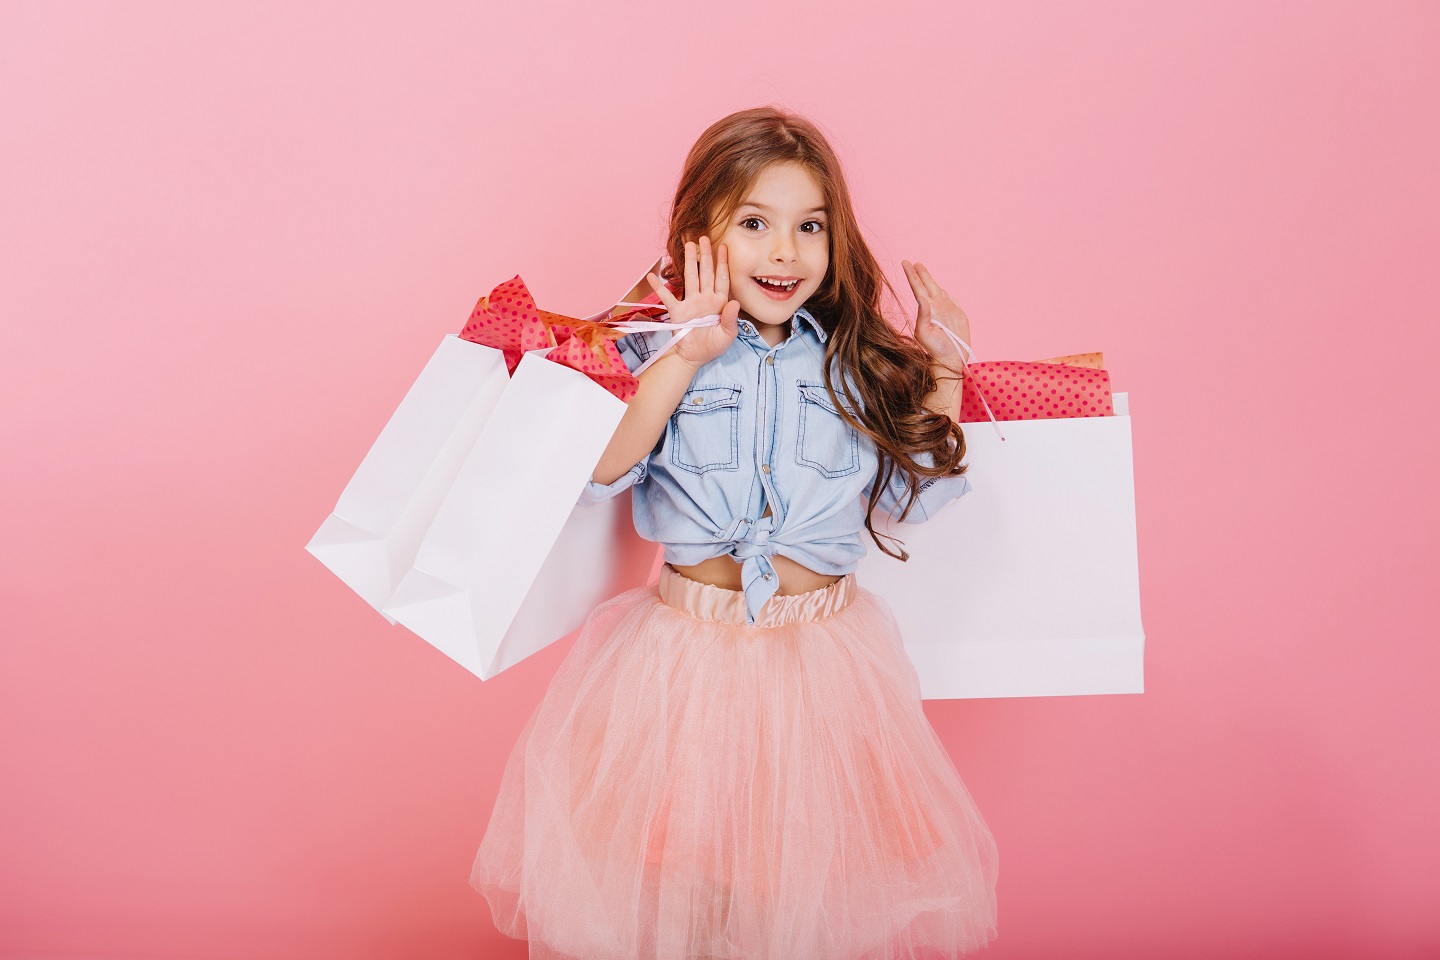 Pretty joyful young girl in tulle skirt, with long brunette hair walking with white packages on pink background. Lovely sweet moments of little princess, pretty friendly child having fun to camera.